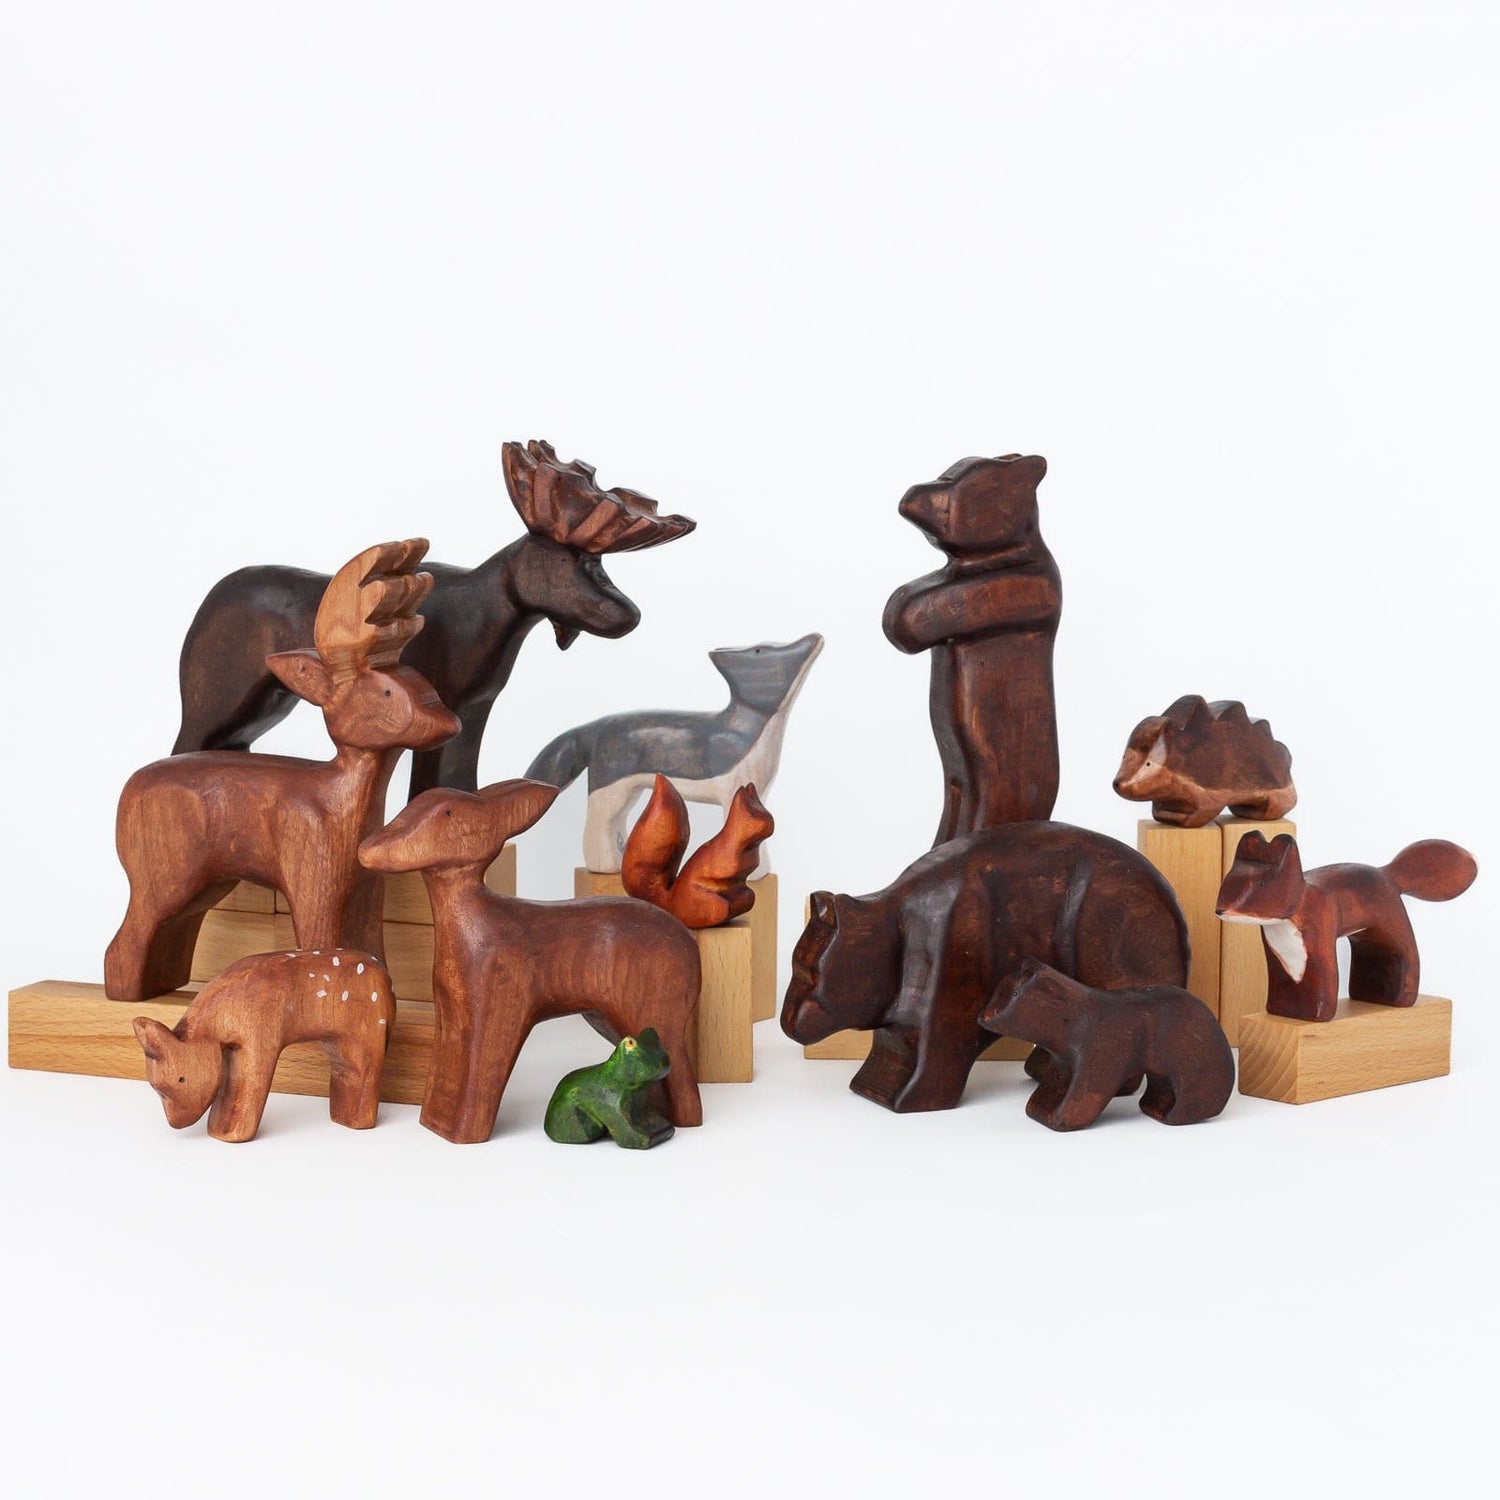 Bumbleberry Toys Wooden Animals "Murray Moose" Wooden Animal Toy (Handmade in Canada)